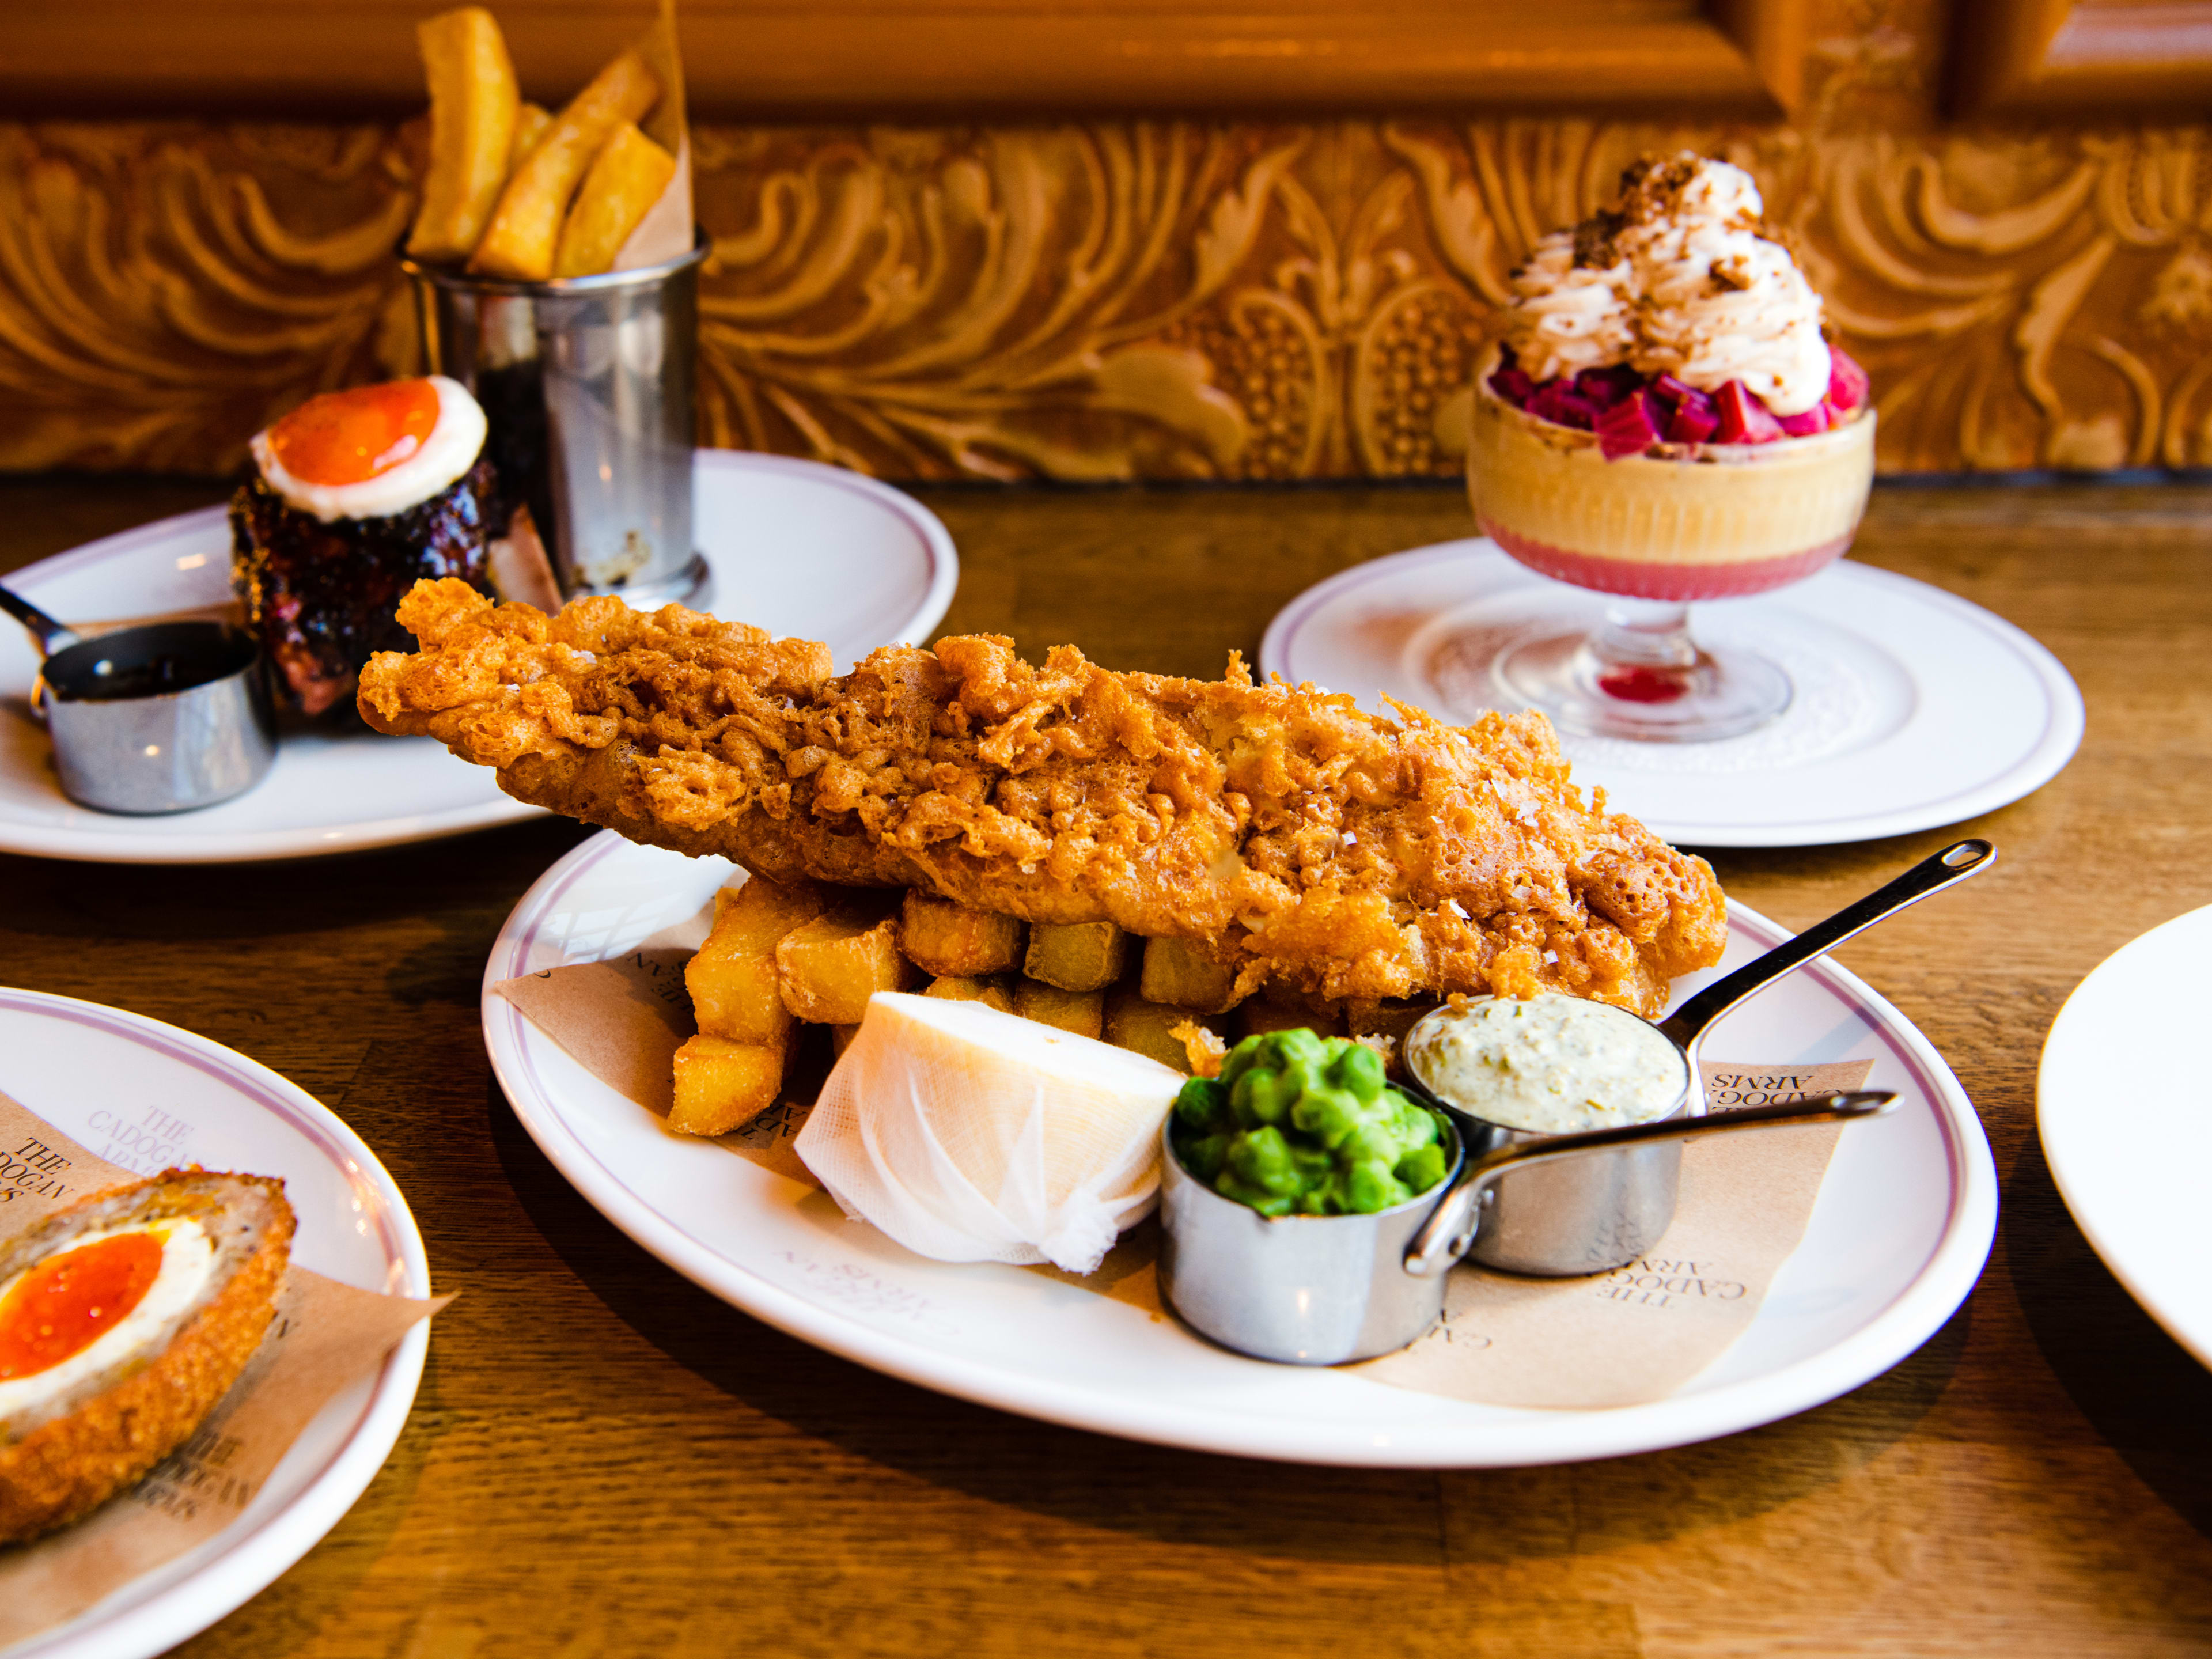 The fish and chips surrounded by other dishes at The Cadogan Arms.